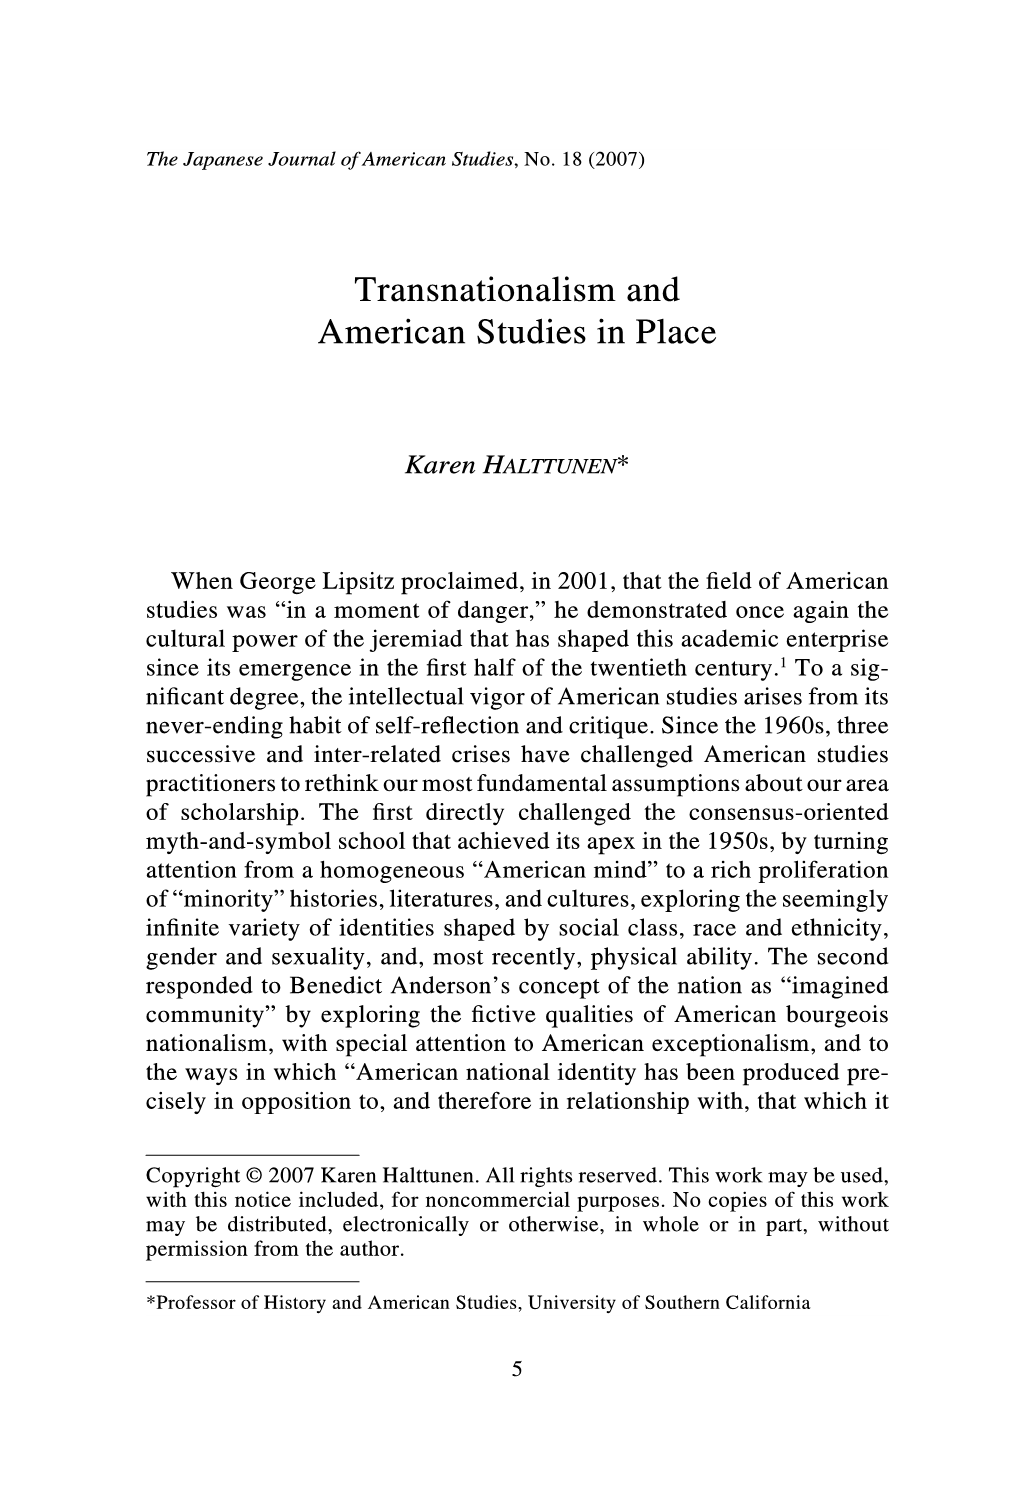 Transnationalism and American Studies in Place